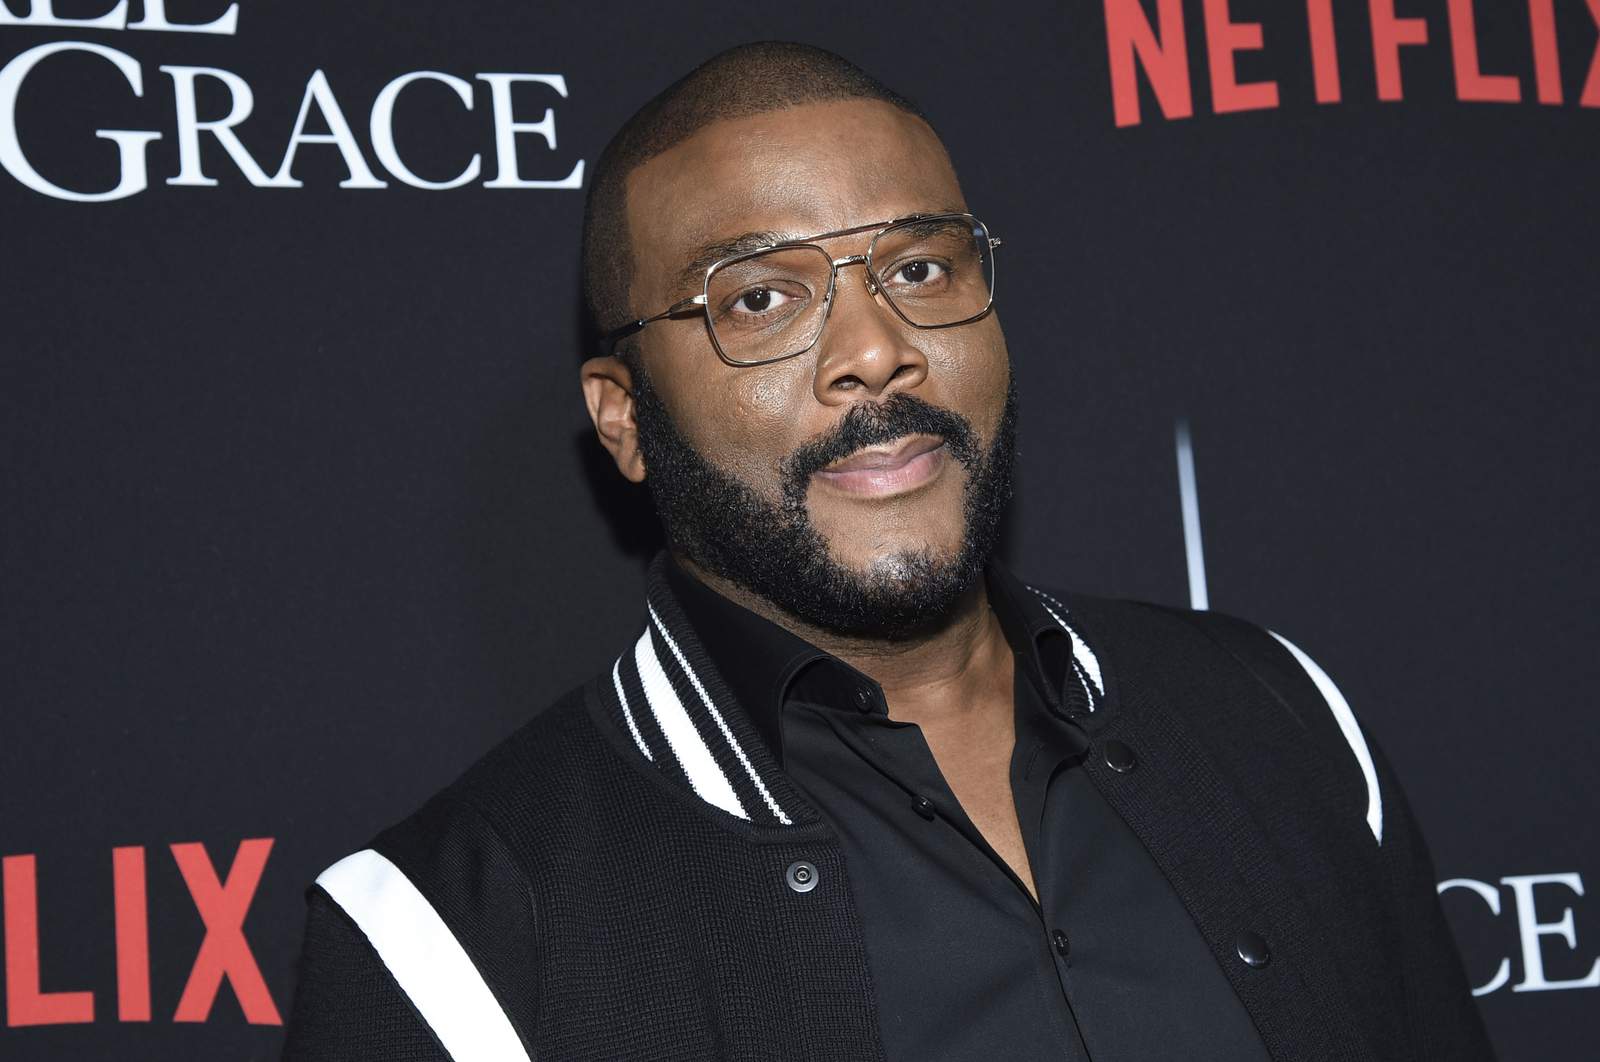 Tyler Perry says he's 'exhausted' by all the hate, division